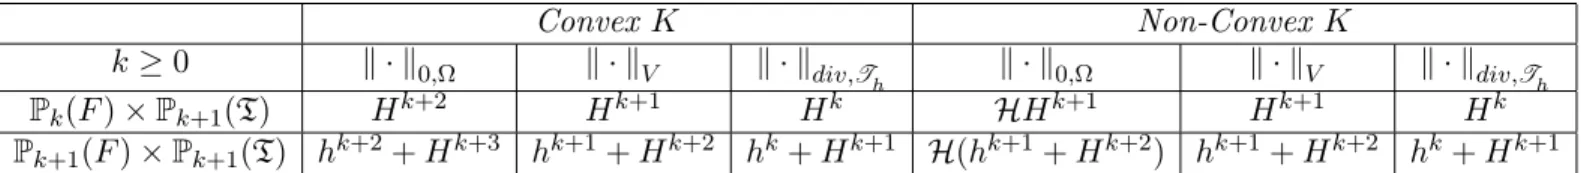 Table 1. Error estimates in the L 2 (Ω), V and H(div, T h ) norms for a partition P built up on convex and non-convex elements K ∈ P .